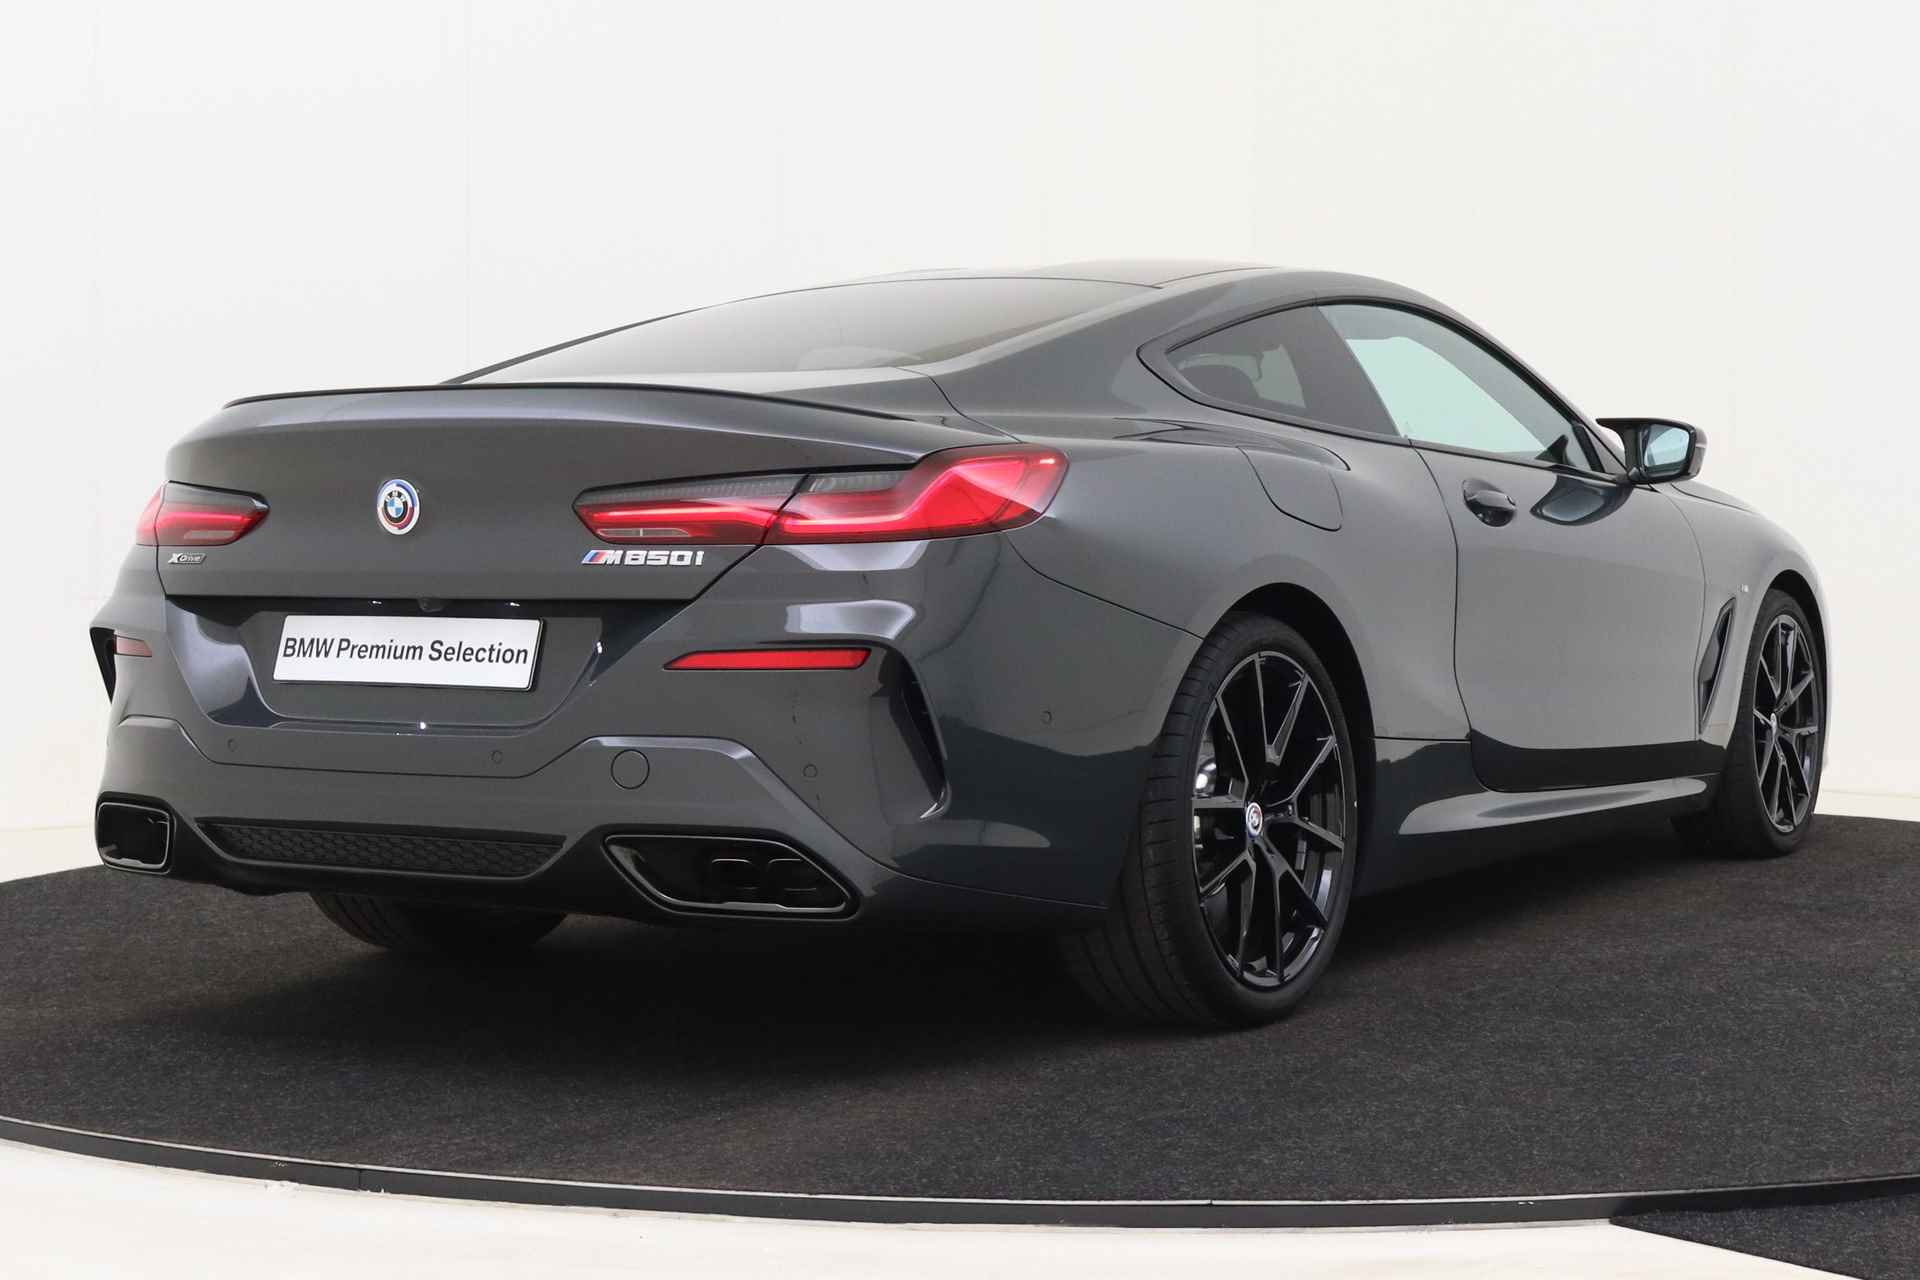 BMW 8 Serie M850i xDrive High Executive M Sport / M Carbondak / Laserlight / Bowers & Wilkins / 50 Jahre M Edition / Driving Assistant Professional / Soft Close - 3/81